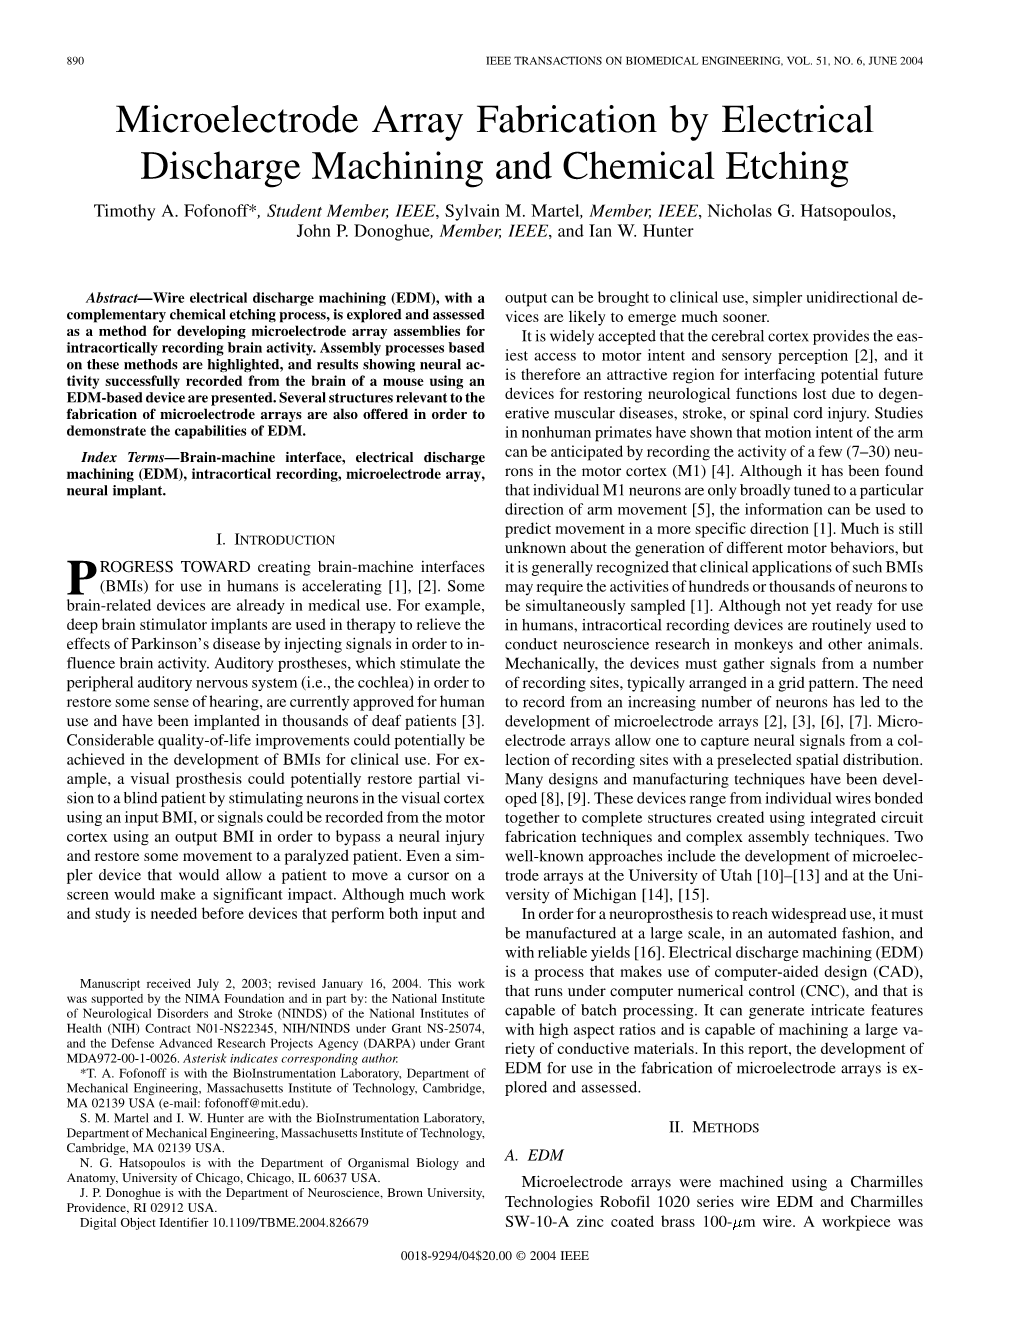 Microelectrode Array Fabrication by Electrical Discharge Machining and Chemical Etching Timothy A